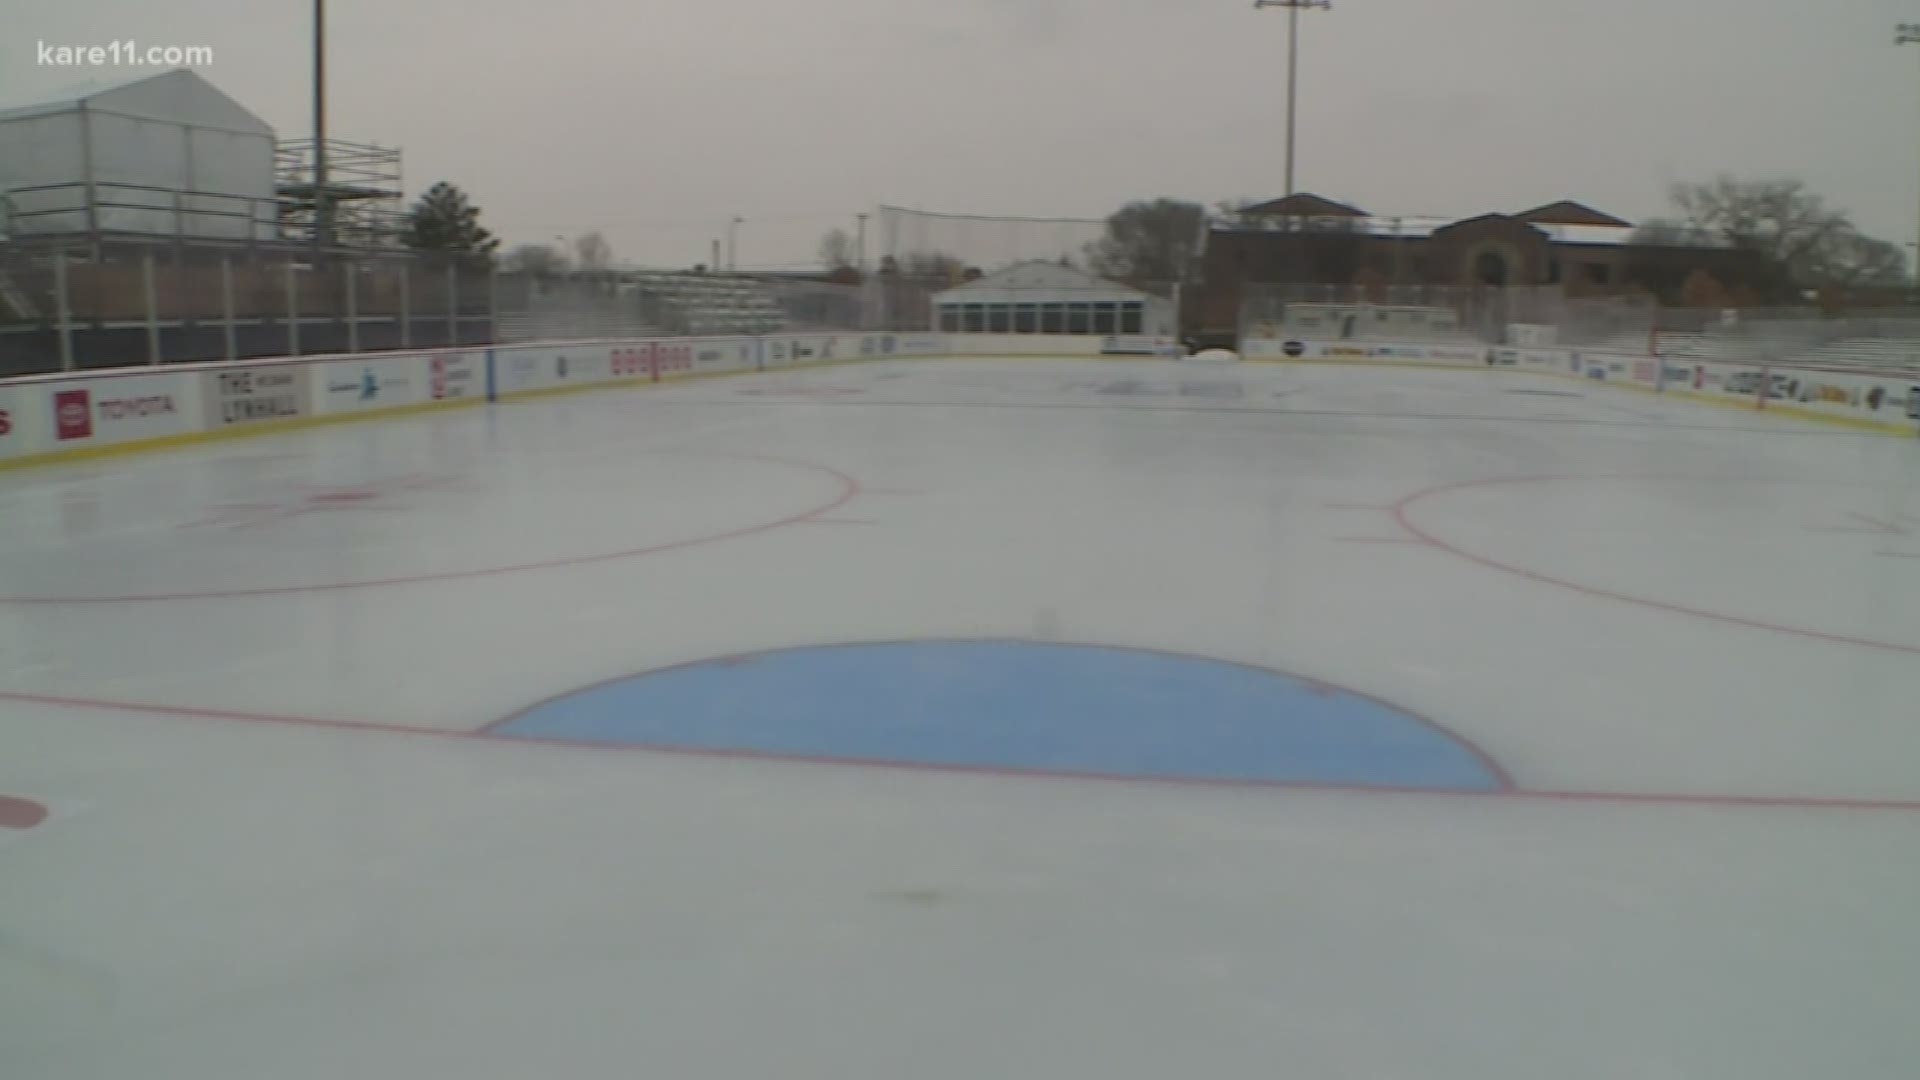 Temps are dipping ahead of a Friday snowstorm, but the outdoor games are still on.